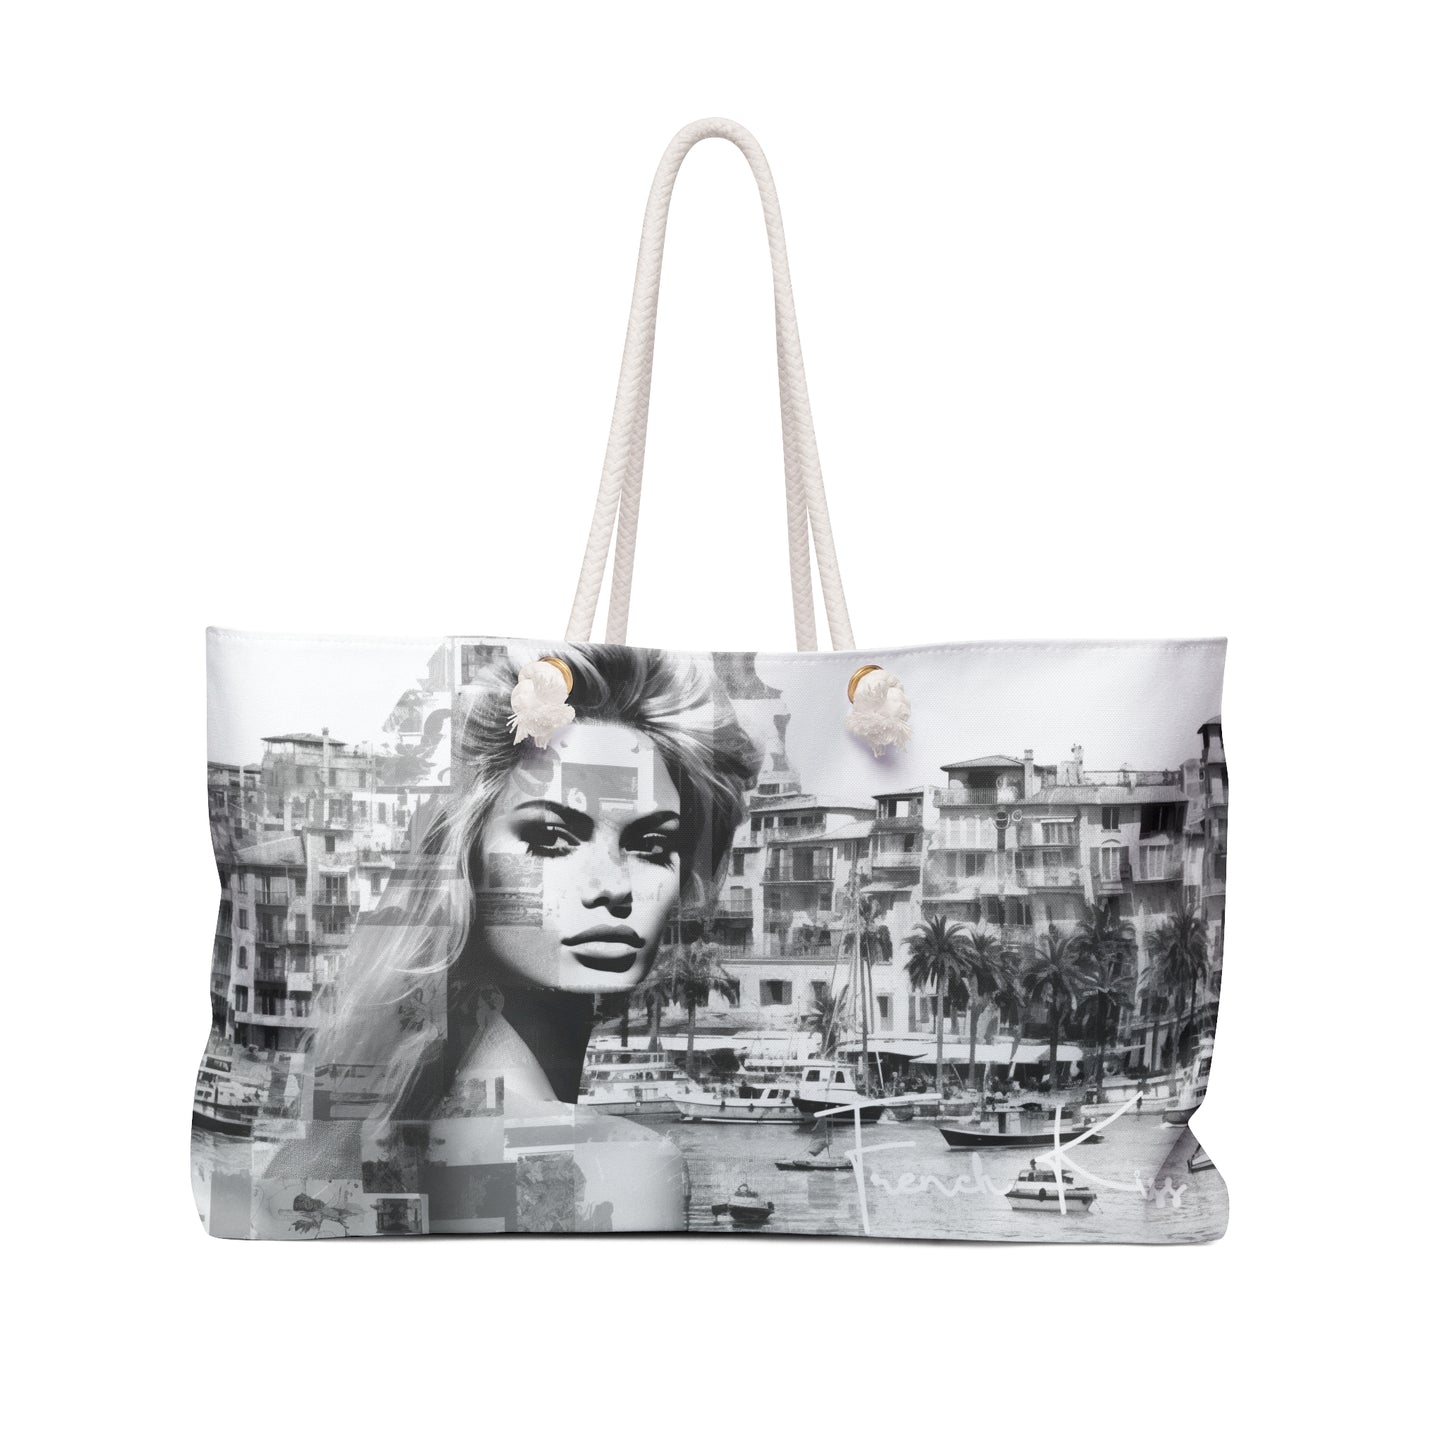 JE REVE Sassy Sexy Chic Weekender Accessory Bag French Kiss Pop Art, Classy, Couture, Travel, Fashion, Beauty gift item